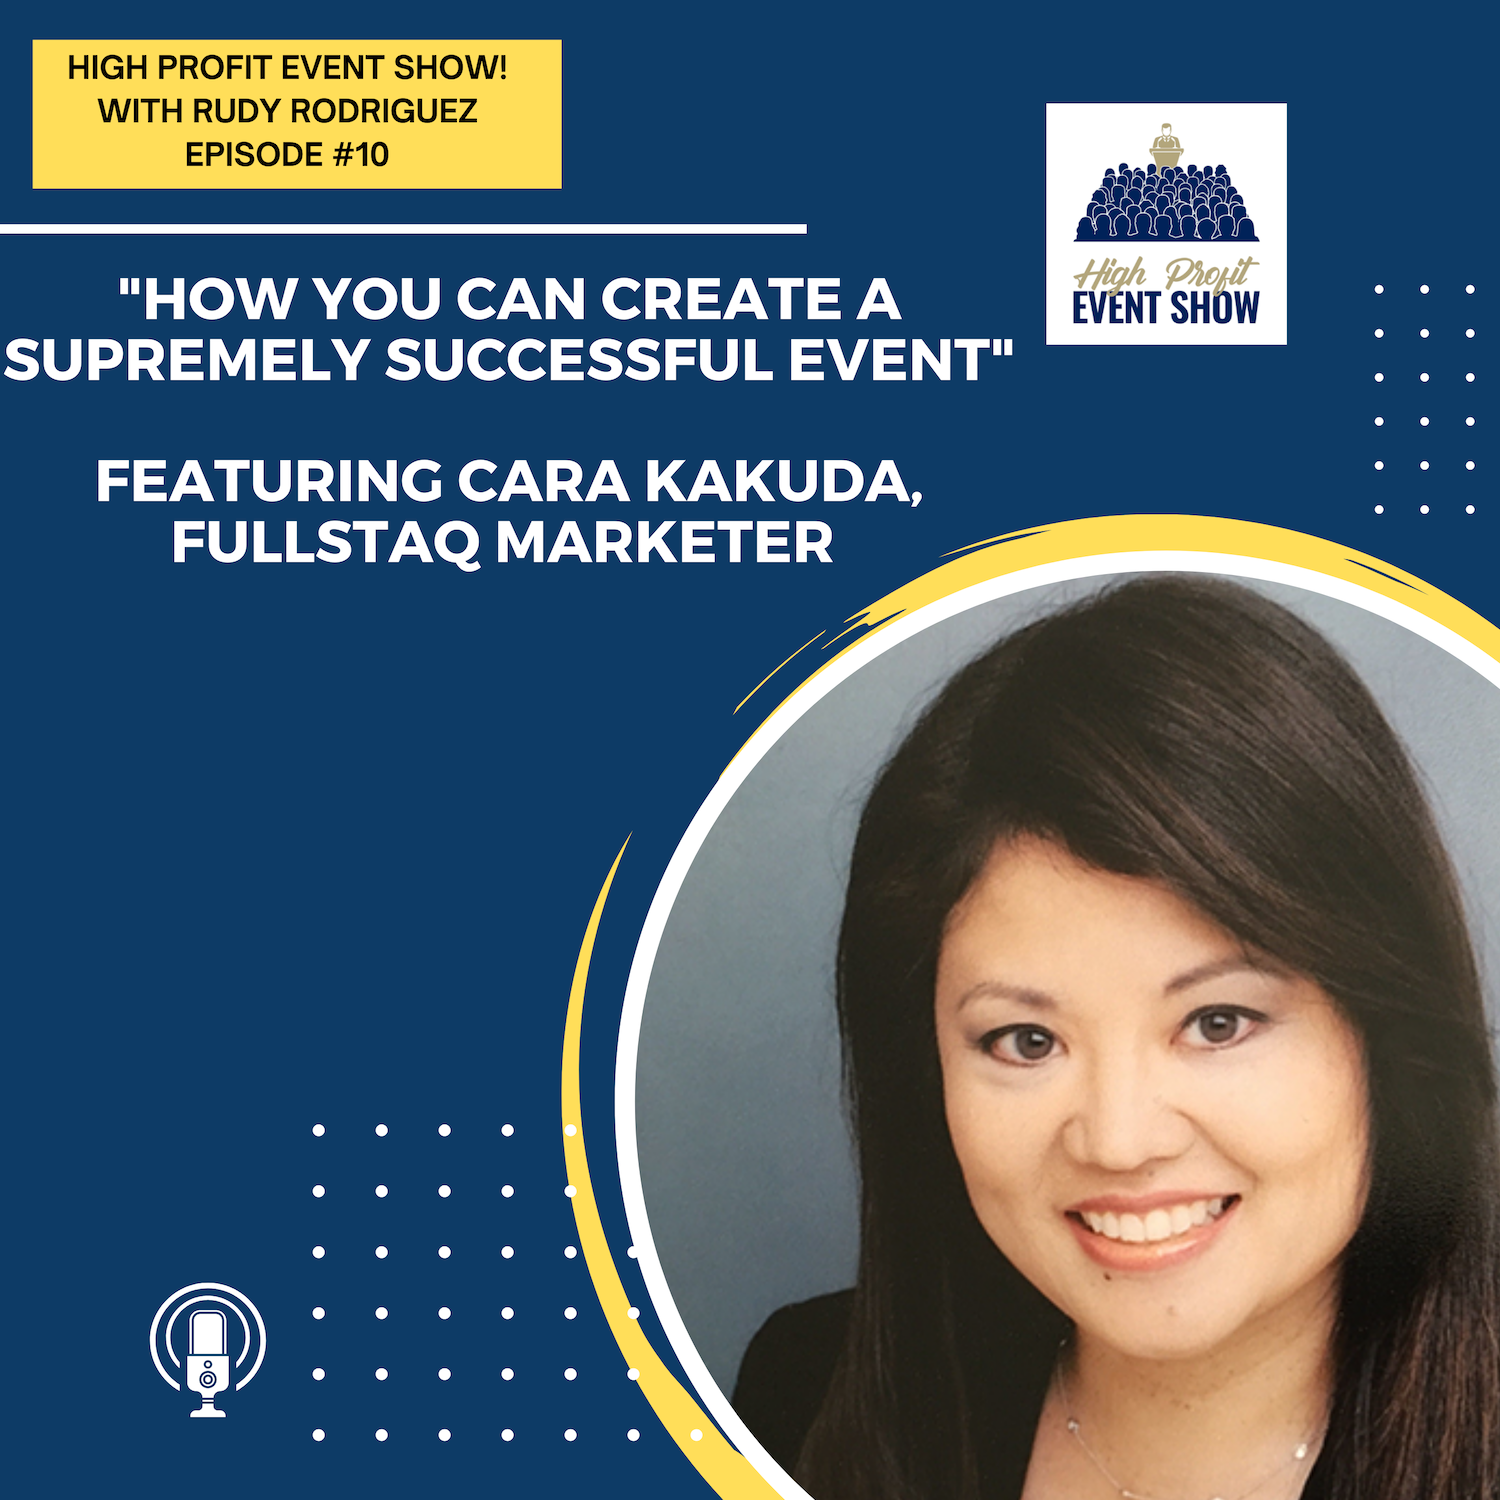 Episode 10: How You Can Create a Supremely Successful Event with Fullstaq Marketer’s Cara Kakuda!